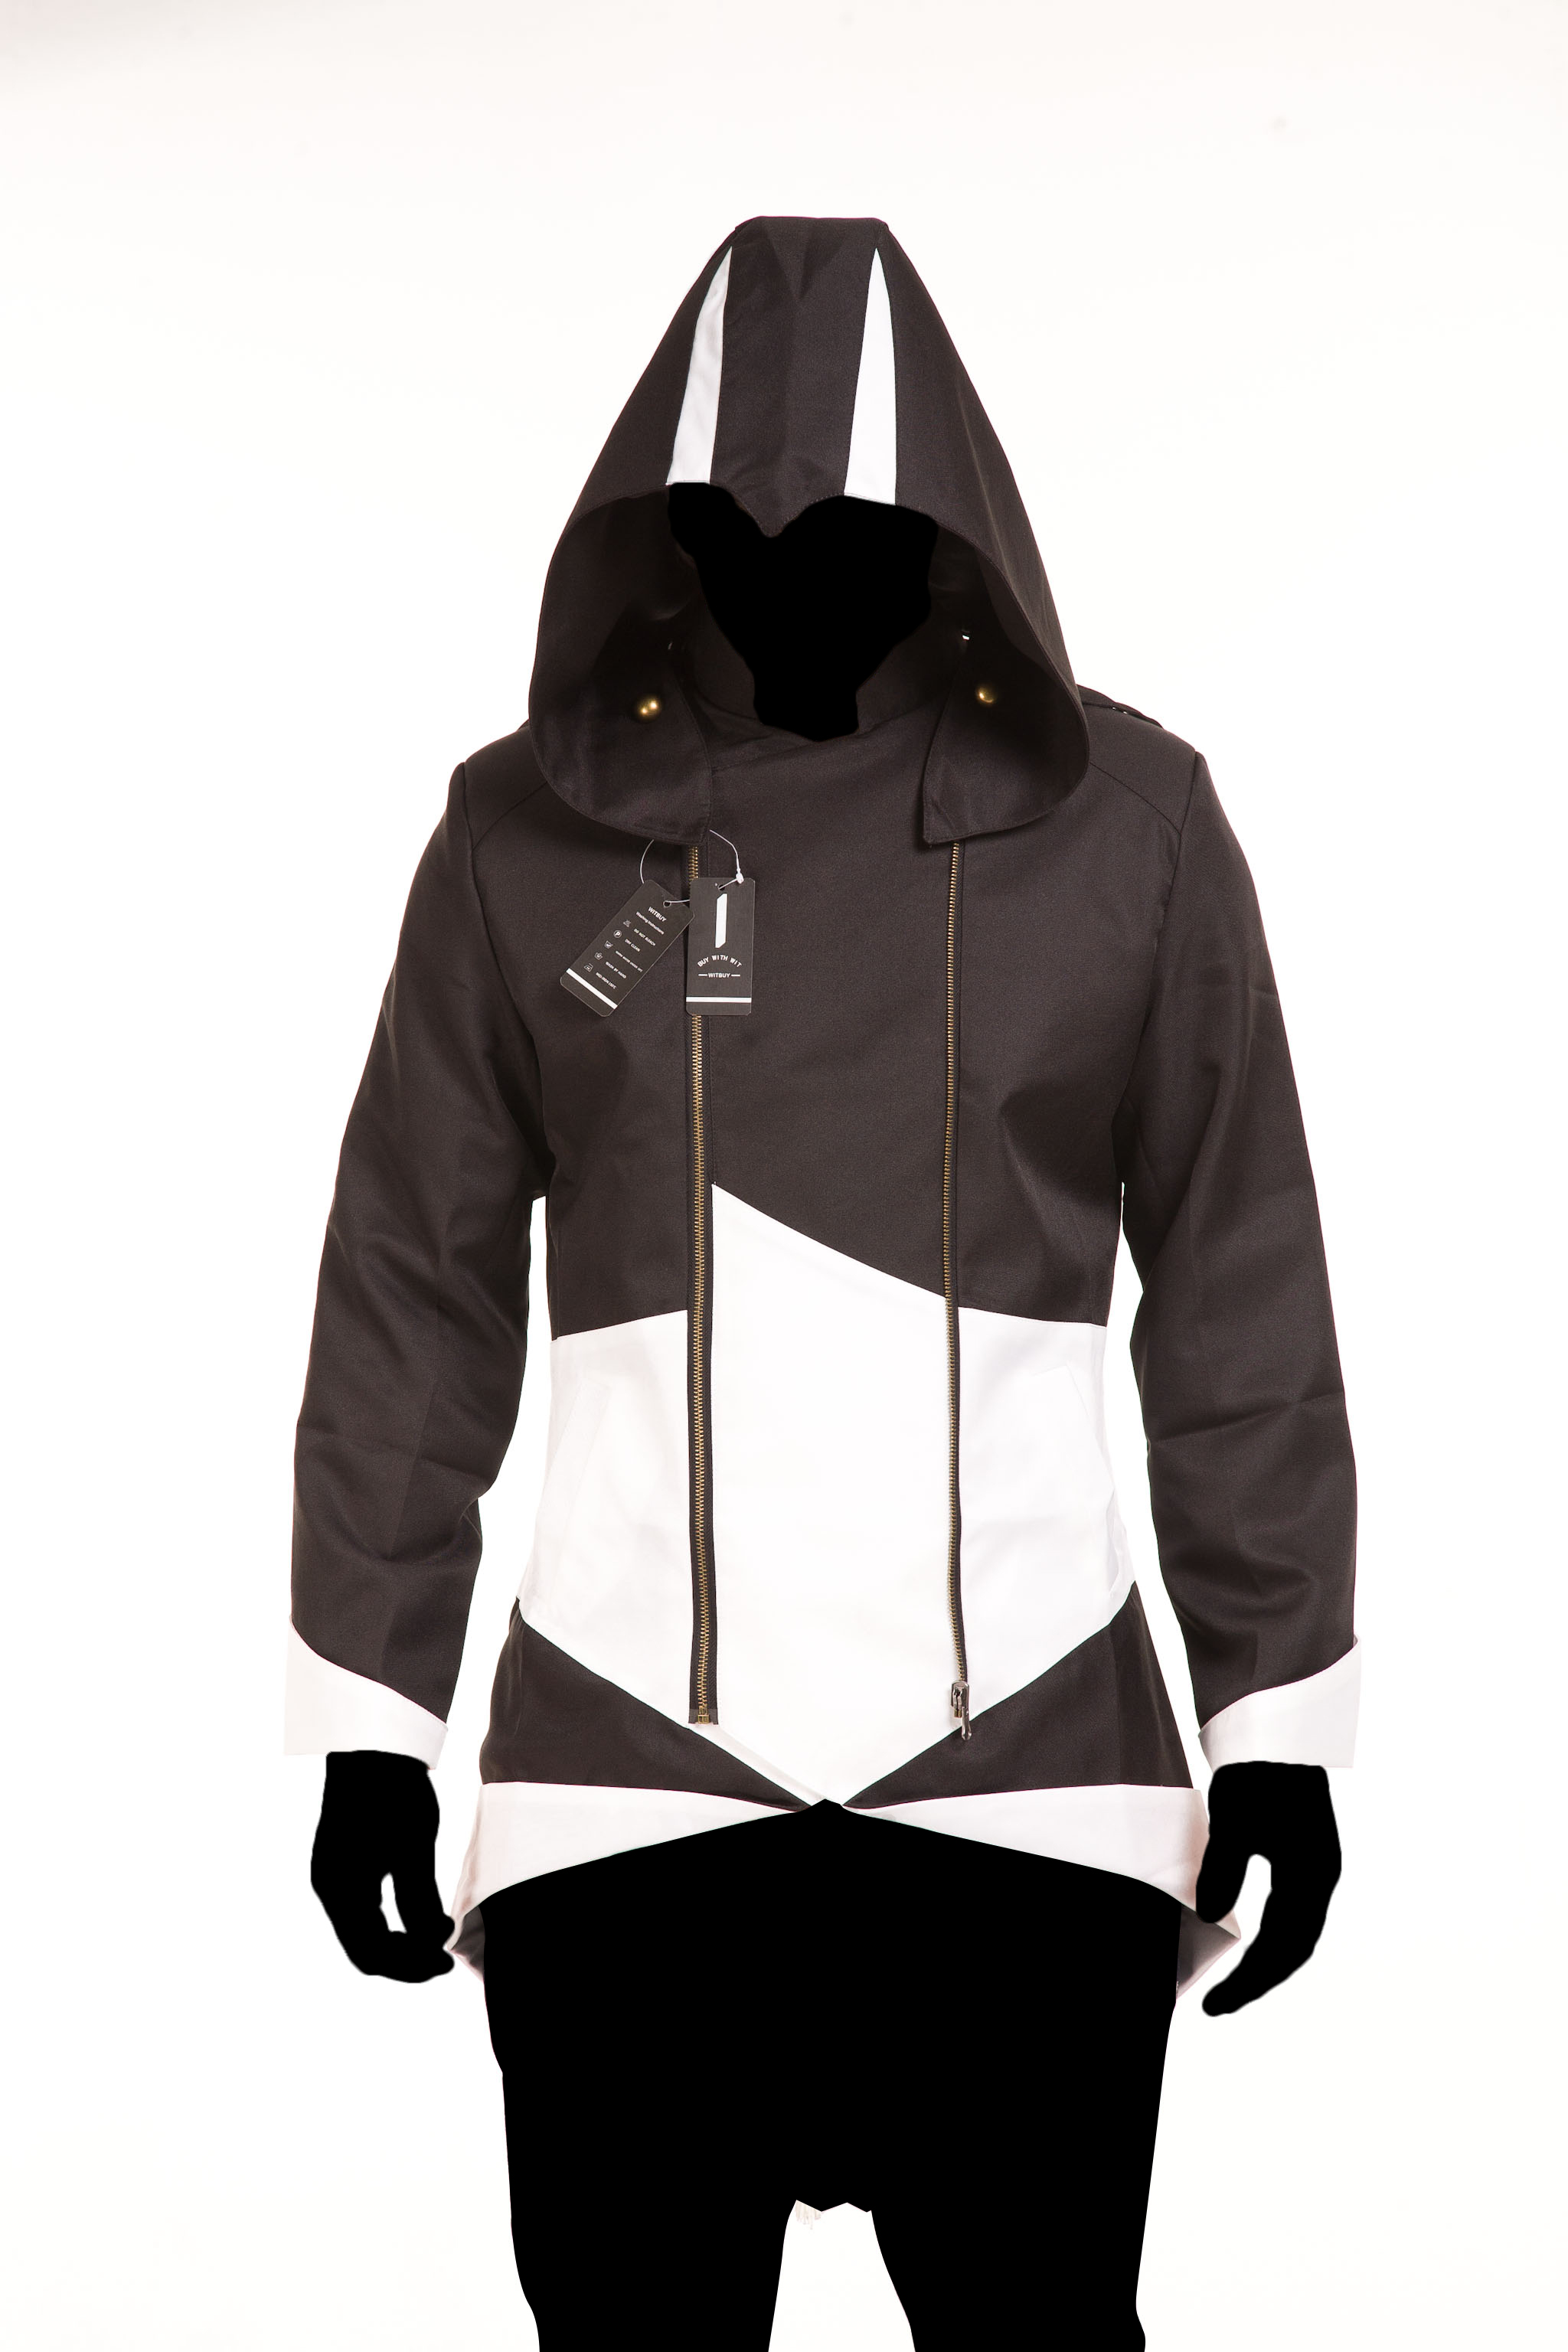 Assassin's Creed 3 Connor Kenway Coat Jacket Hoodie Black White